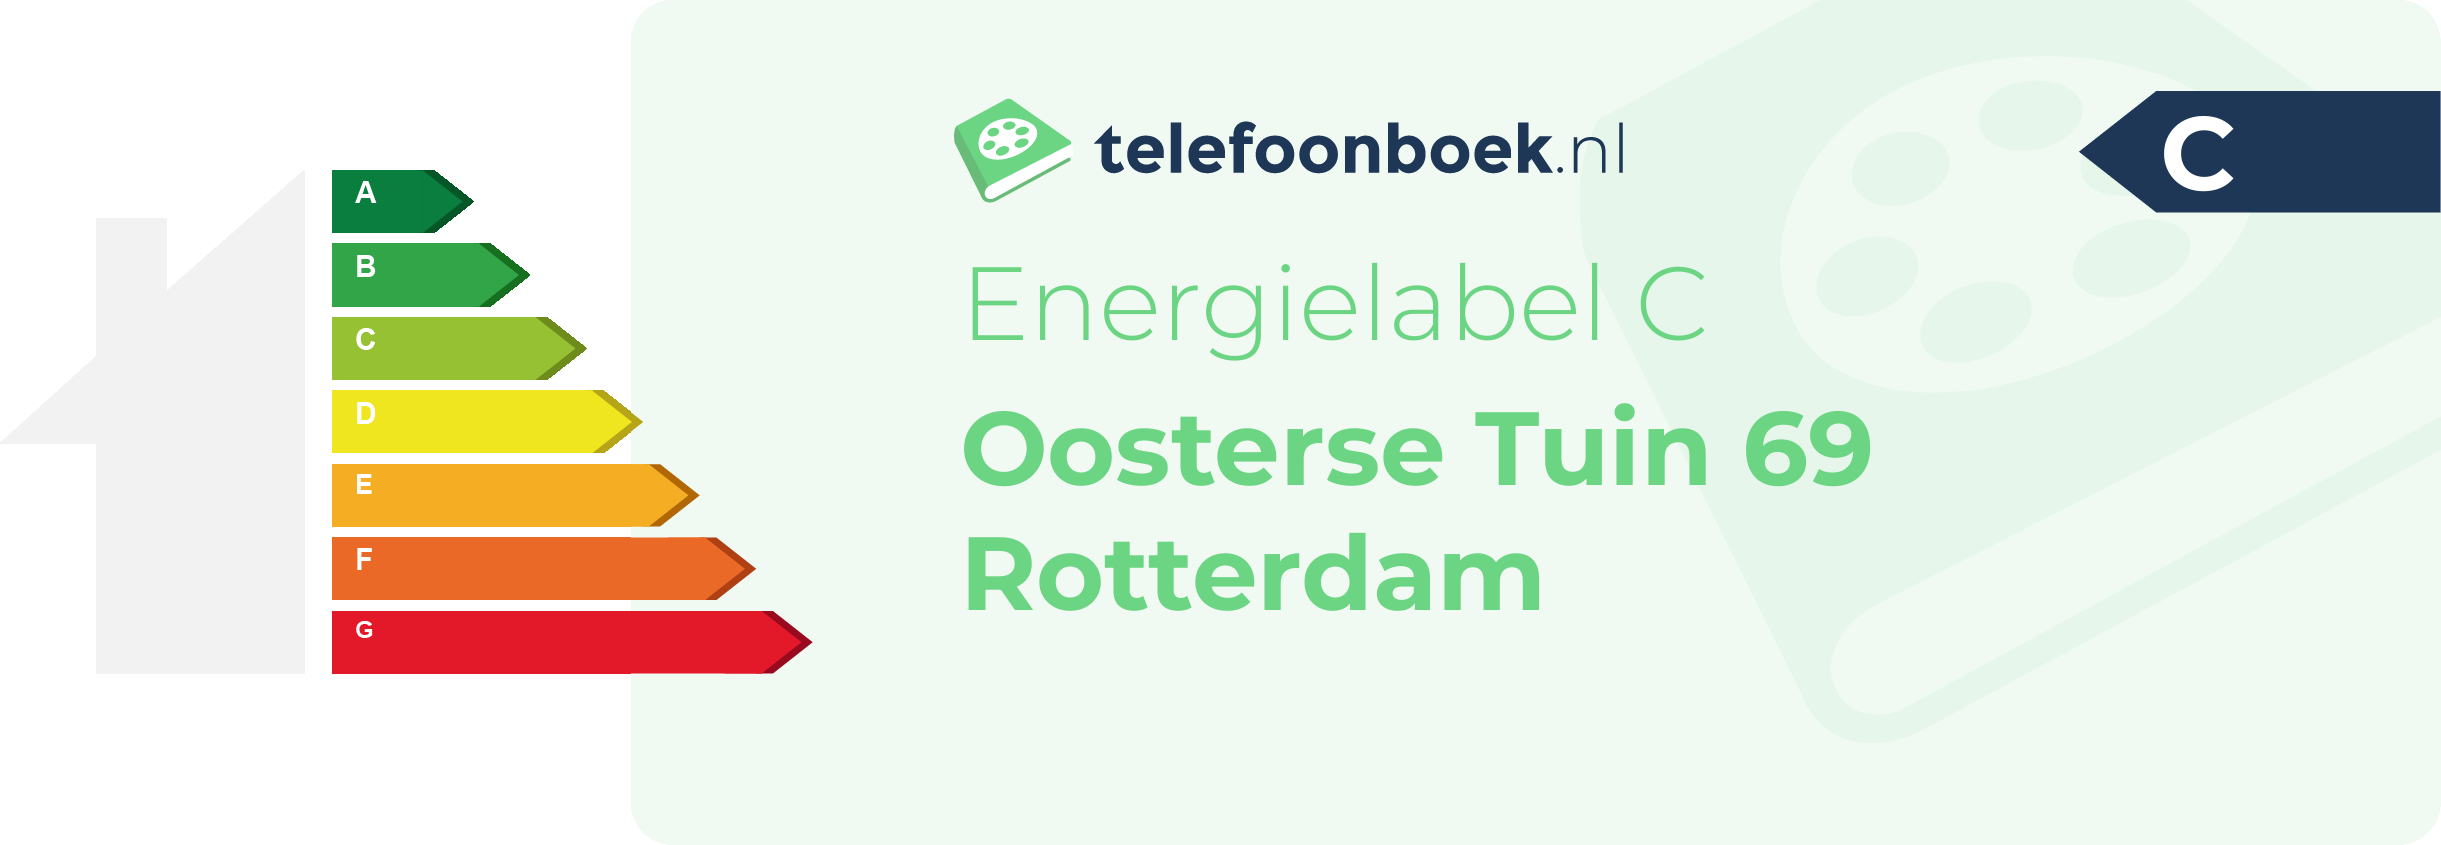 Energielabel Oosterse Tuin 69 Rotterdam